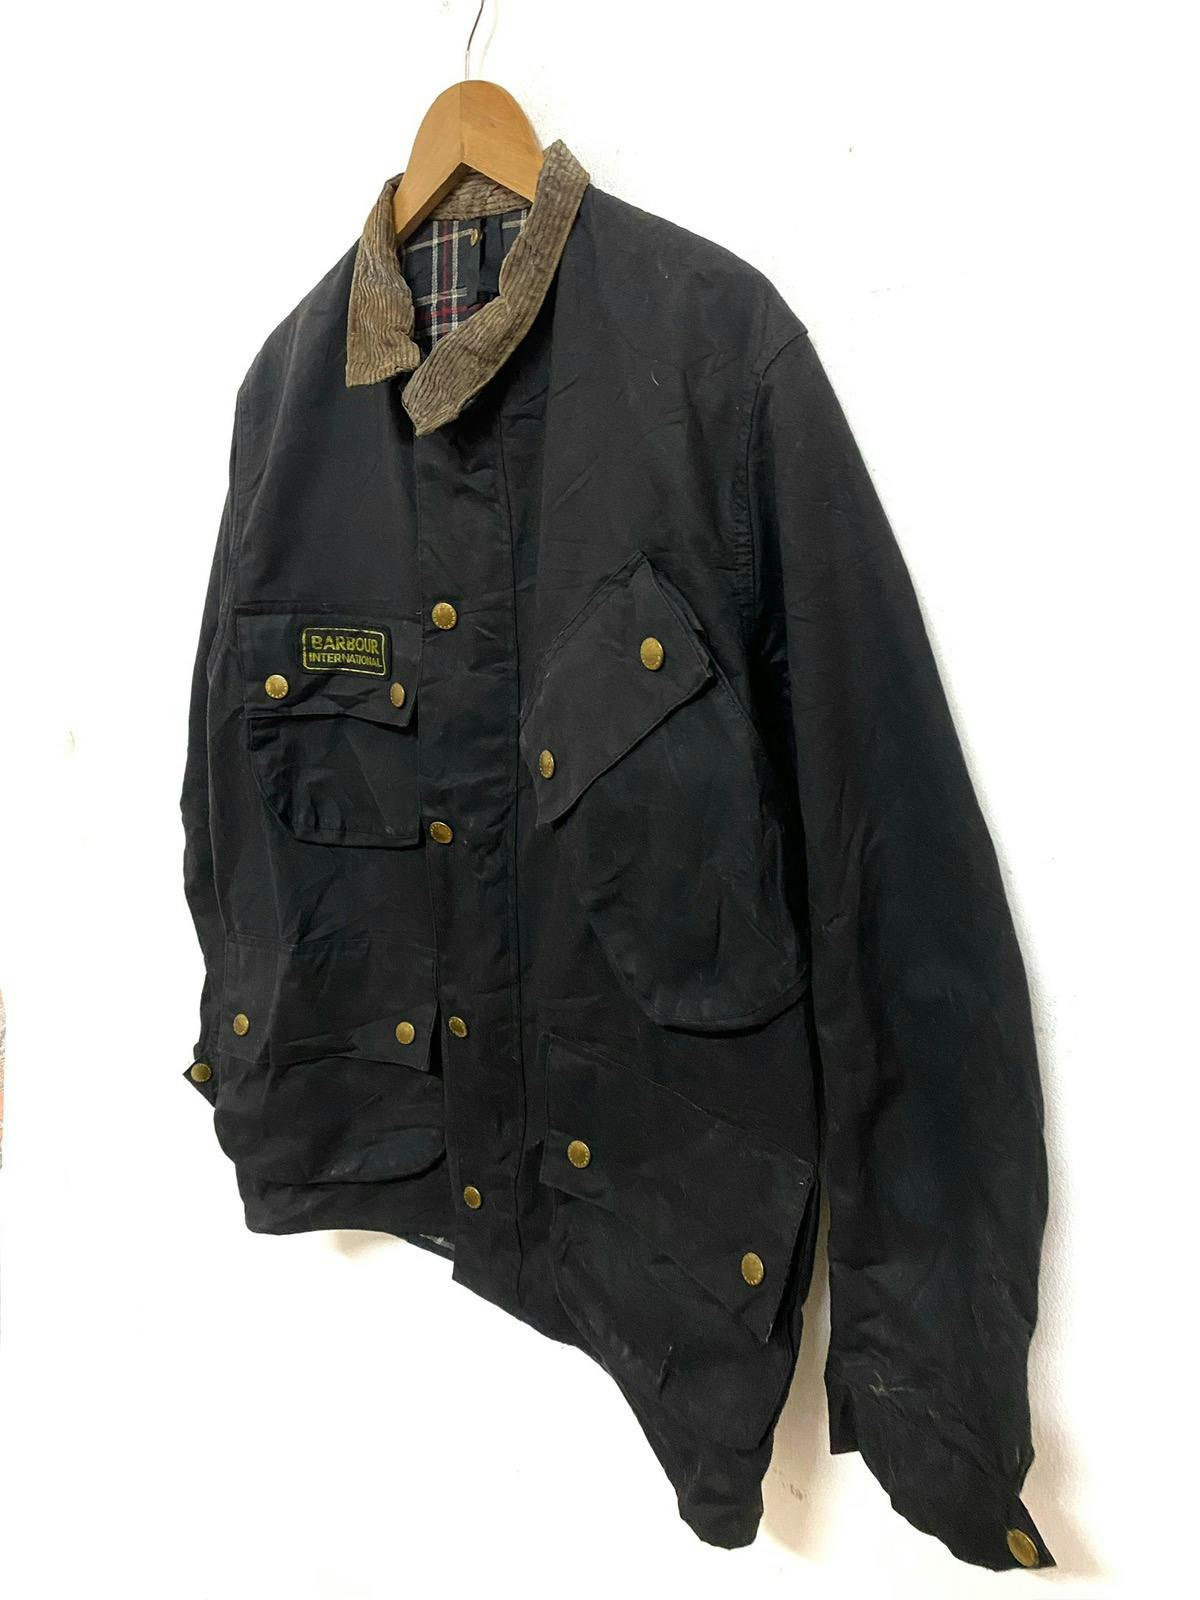 Barbour A7 International Suit Wax Jacket Made in England - 5